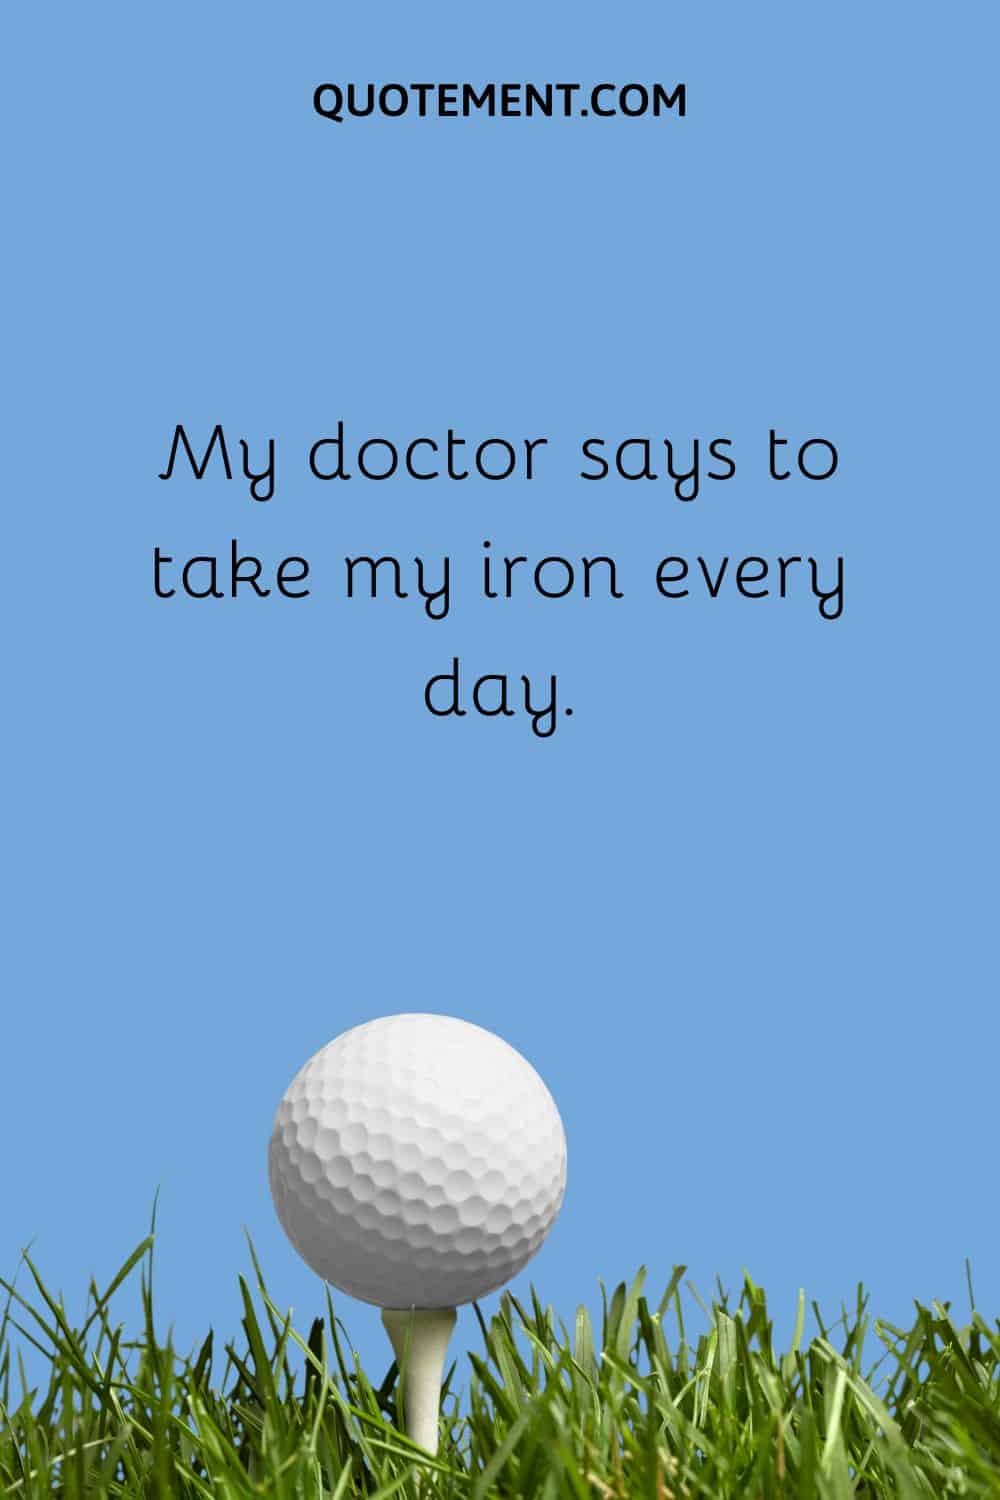 My doctor says to take my iron every day